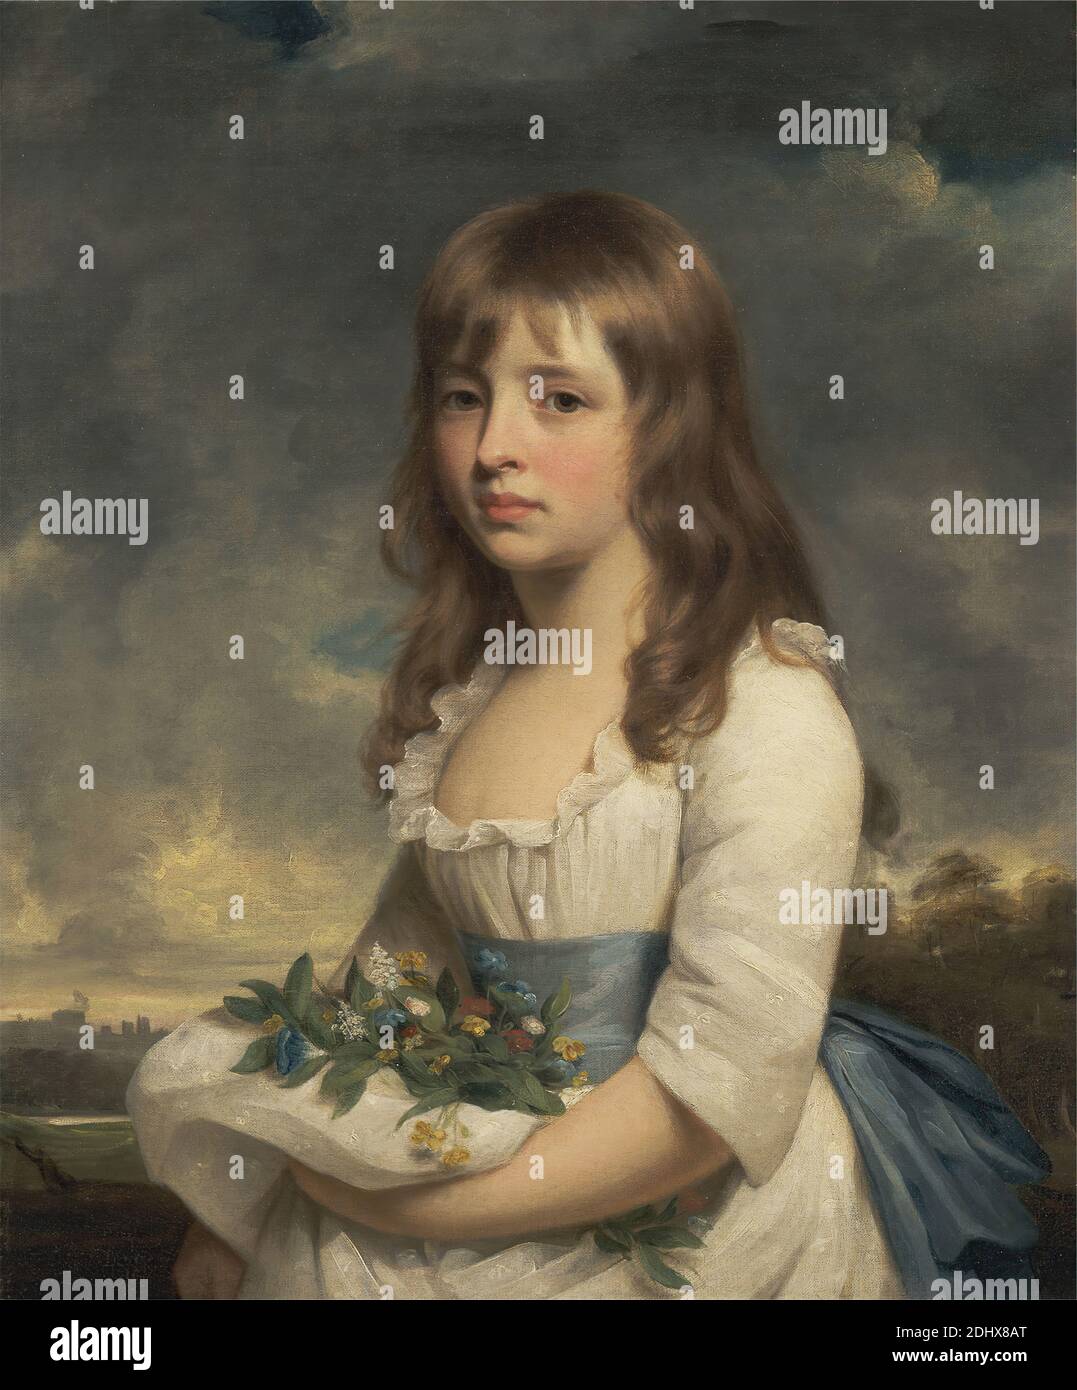 Portrait of a Girl, Sir William Beechey, 1753–1839, British, ca. 1790, Oil on canvas, Support (PTG): 30 1/8 x 25 1/8 inches (76.5 x 63.8 cm), child, clouds, costume, flowers (plants), girl, landscape, portrait, sash Stock Photo